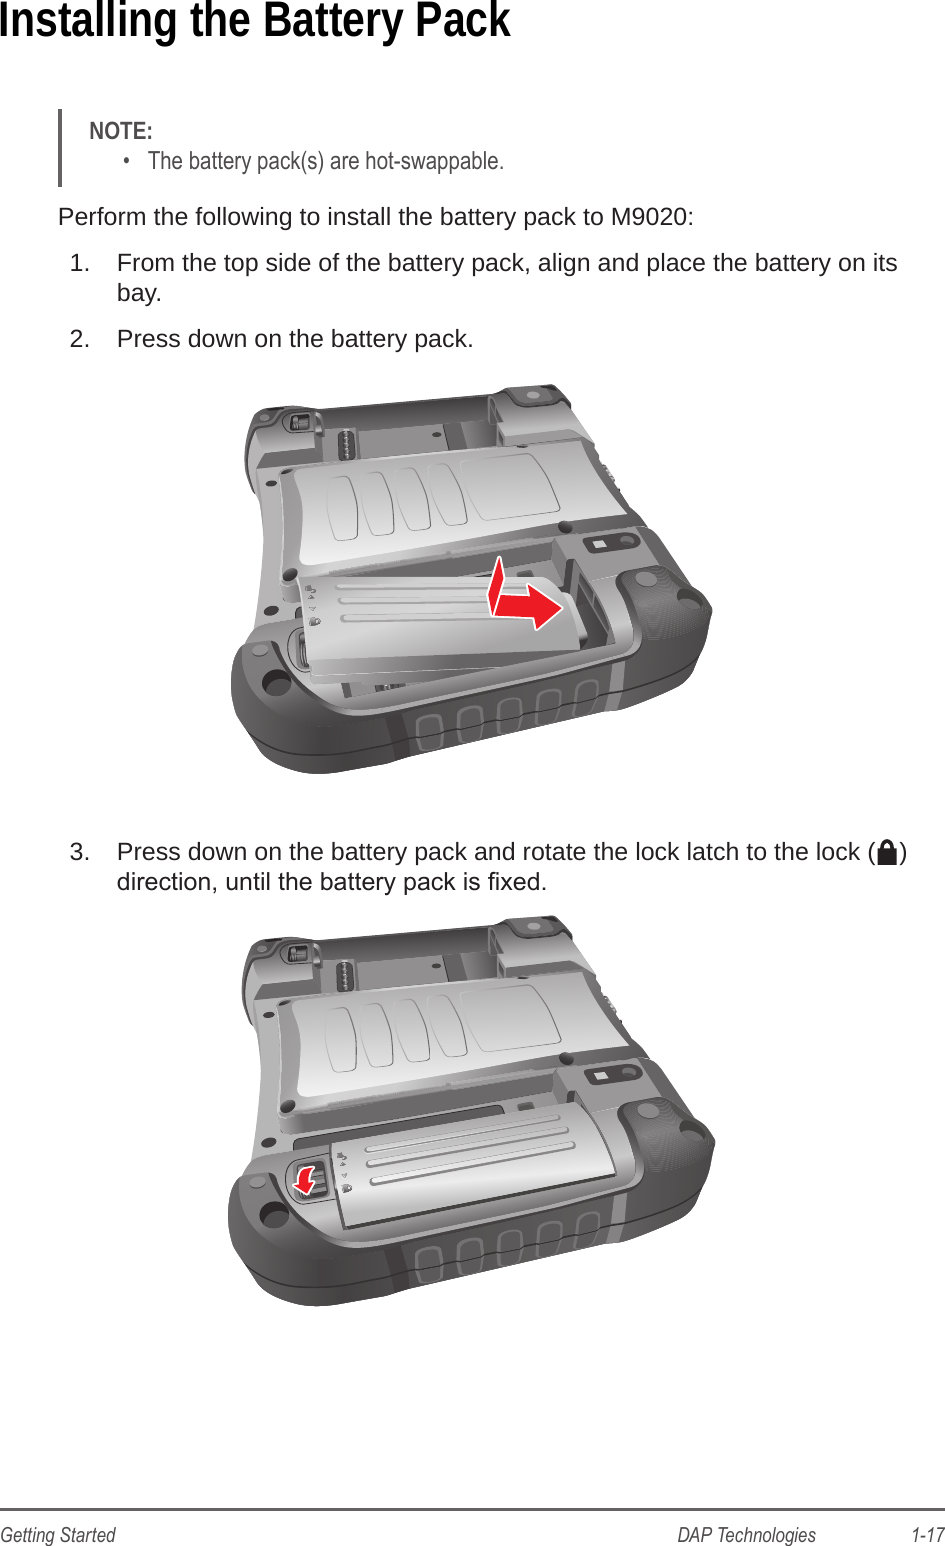 DAP Technologies                    1-17Getting StartedInstalling the Battery PackNOTE: •  The battery pack(s) are hot-swappable.Perform the following to install the battery pack to M9020:1.  From the top side of the battery pack, align and place the battery on its bay.2.  Press down on the battery pack.3.  Press down on the battery pack and rotate the lock latch to the lock ( ) direction, until the battery pack is xed.